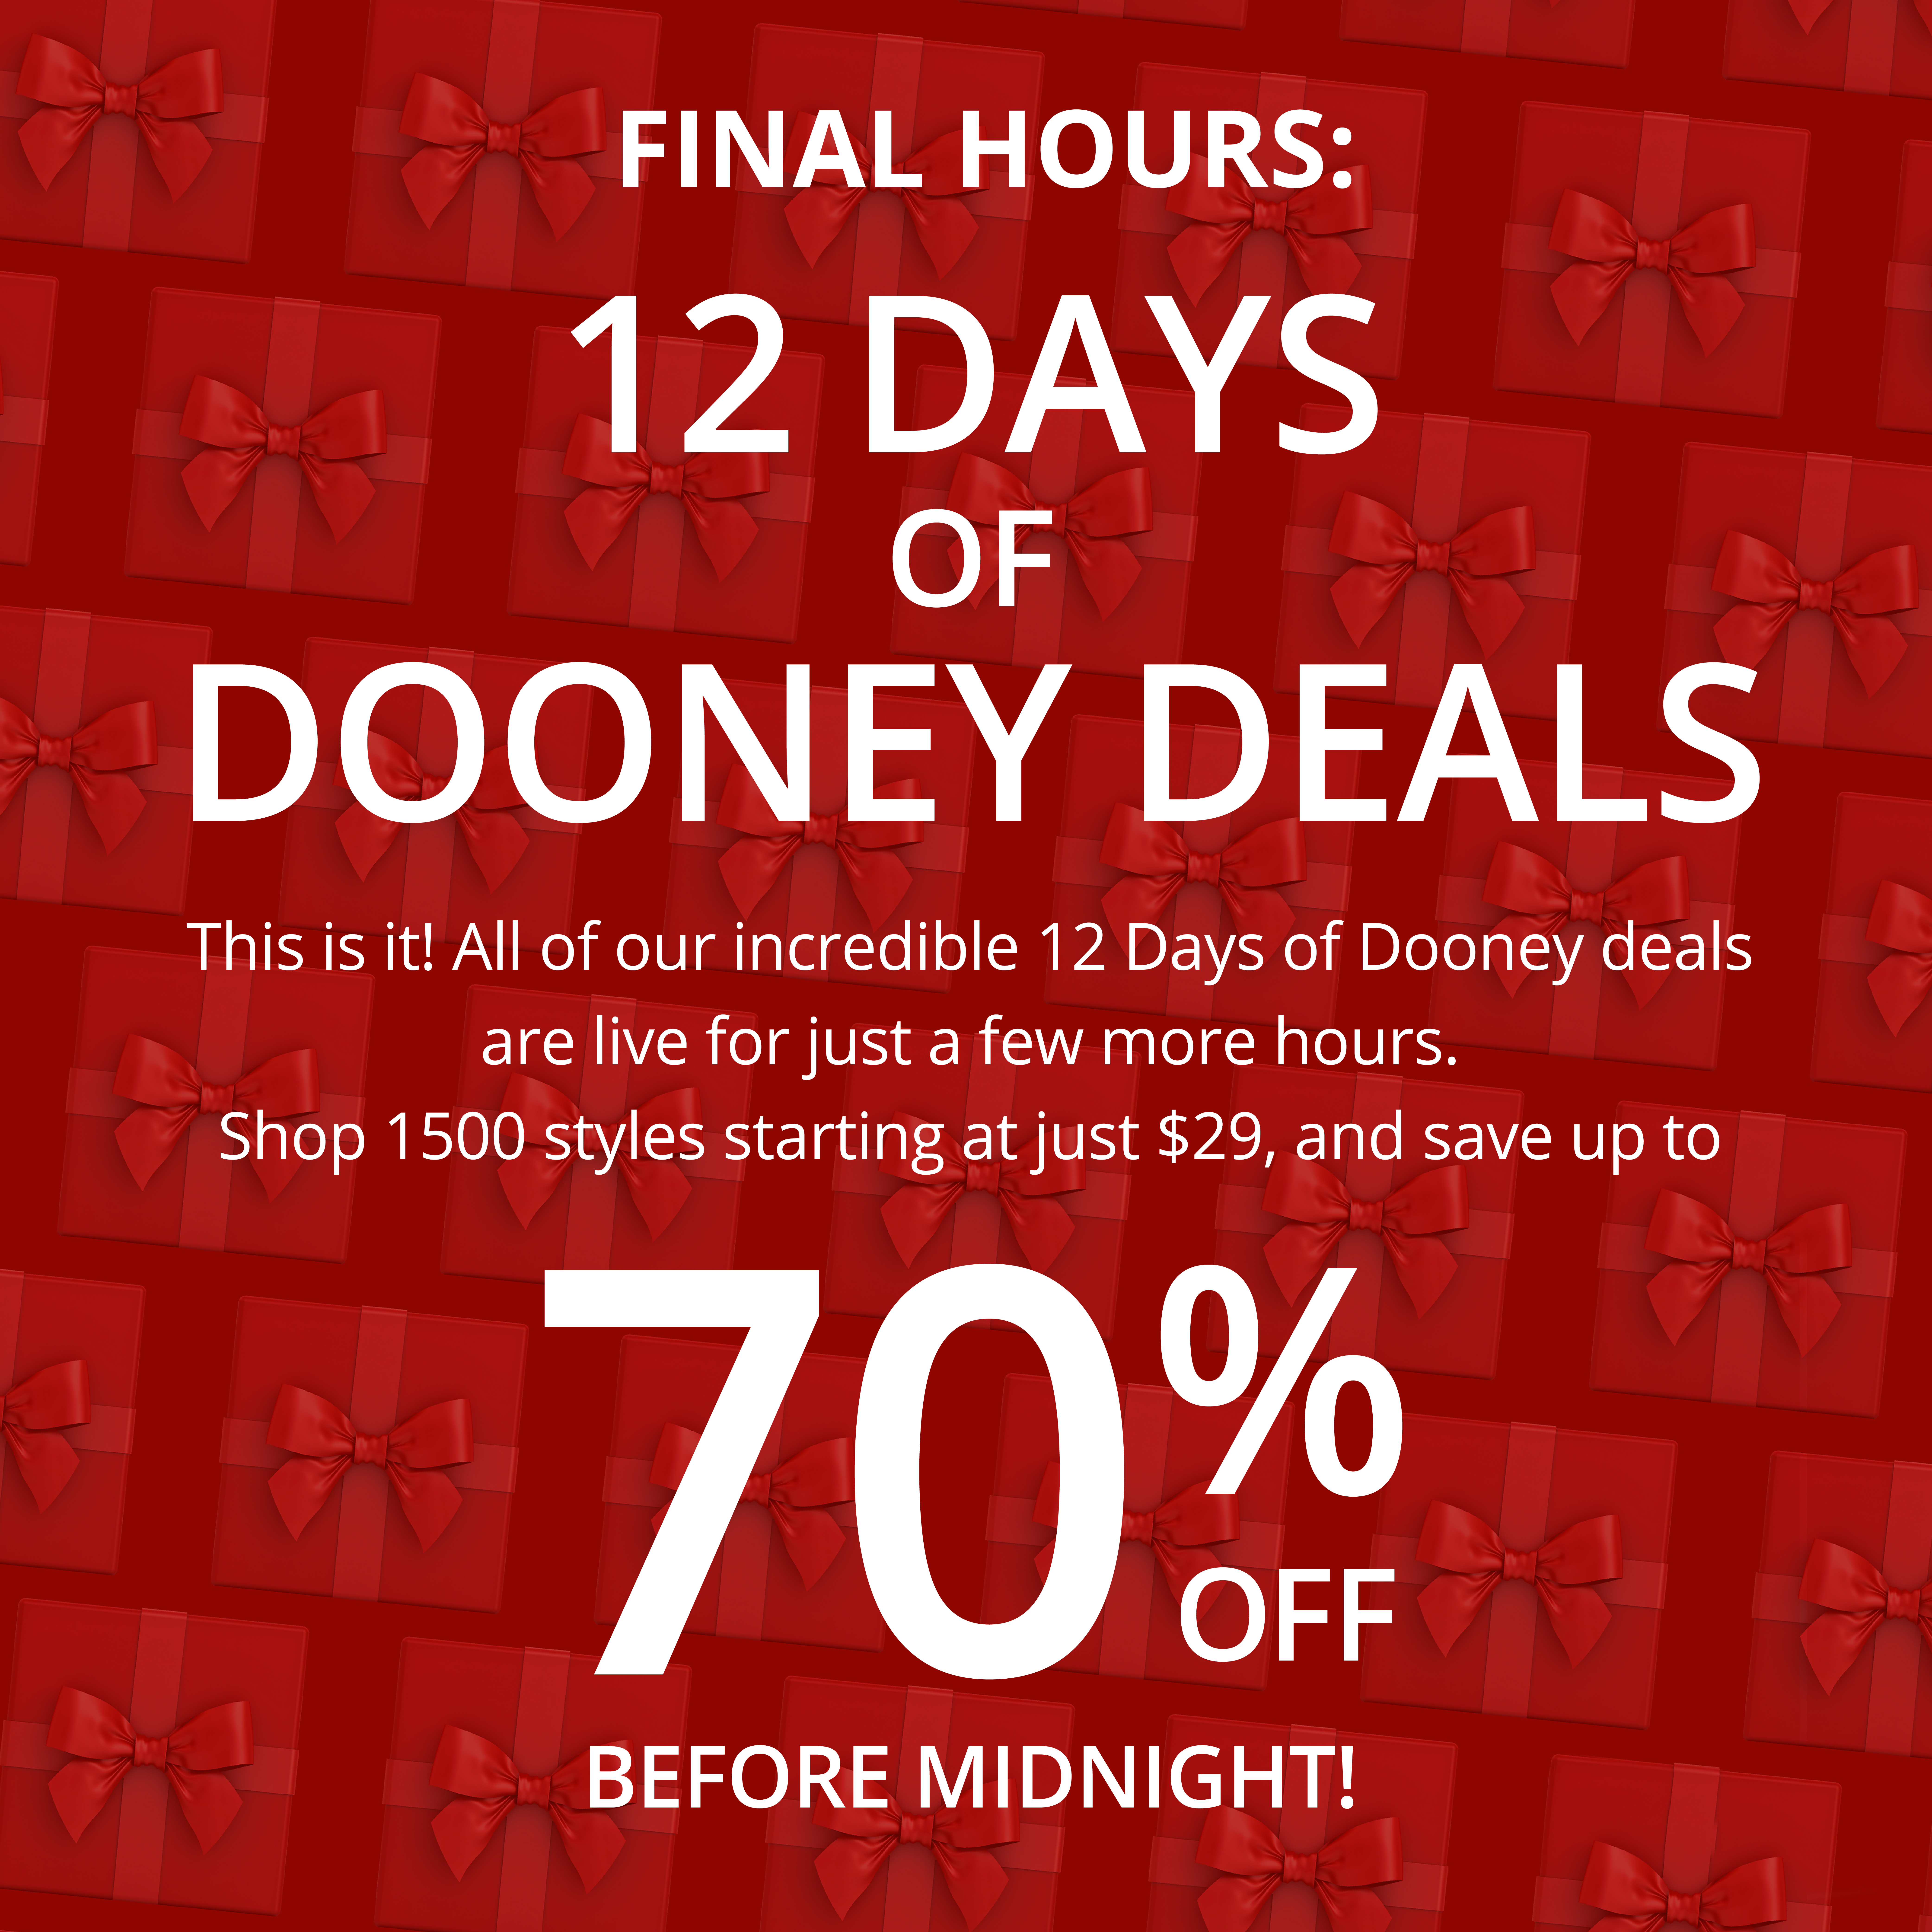 FINAL HOURS: 12 DAYS OF DOONEY DEALS This is it! All of our incredible 12 Days of Dooney deals are live for just a few more hours. Shop 1500 styles starting at just $29, and save up to % OFF BEFORE MIDNIGHT! 